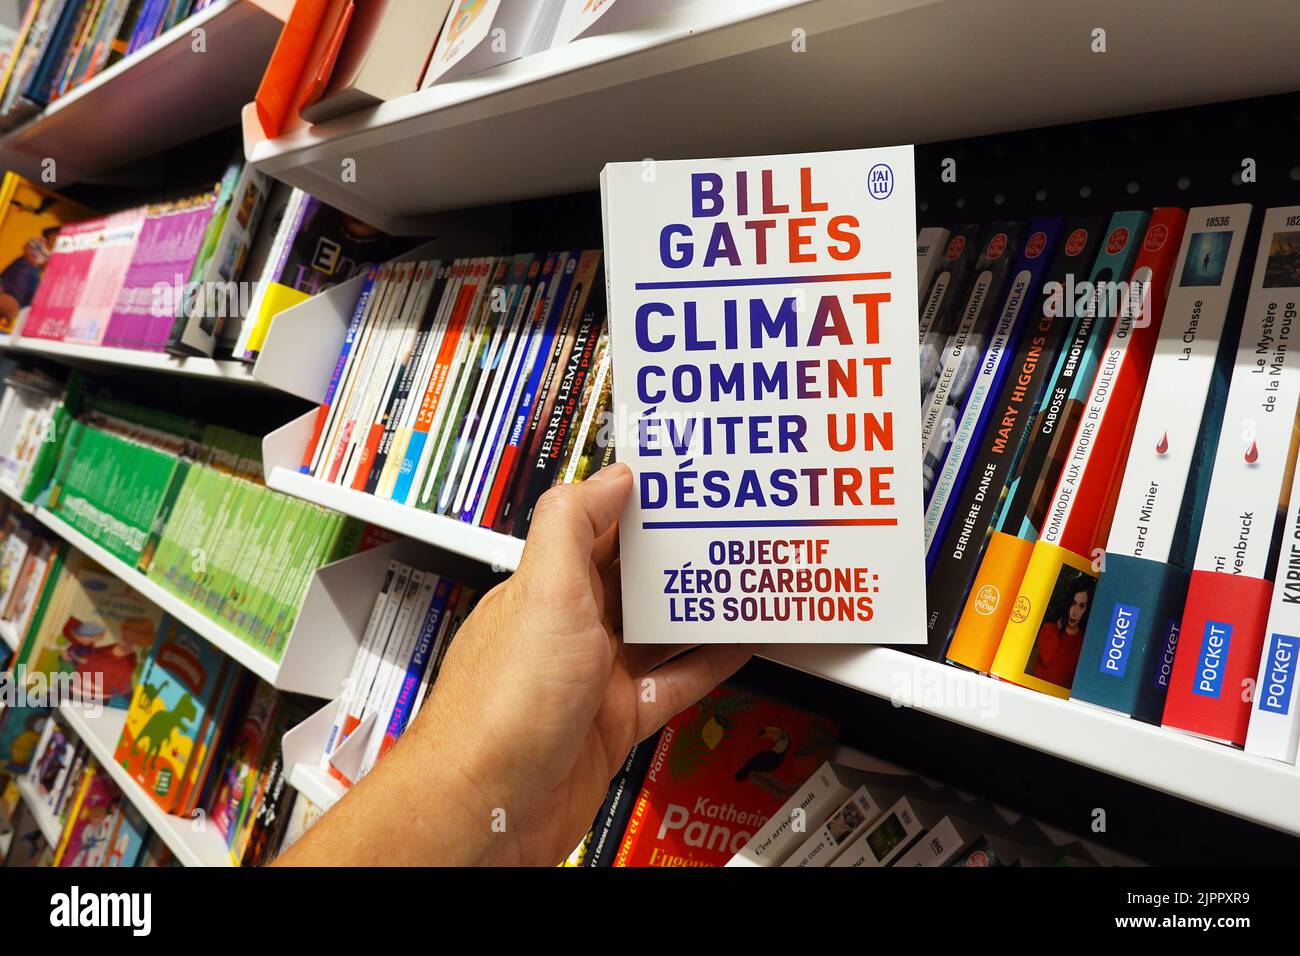 Book by Bill Gates in a store Stock Photo